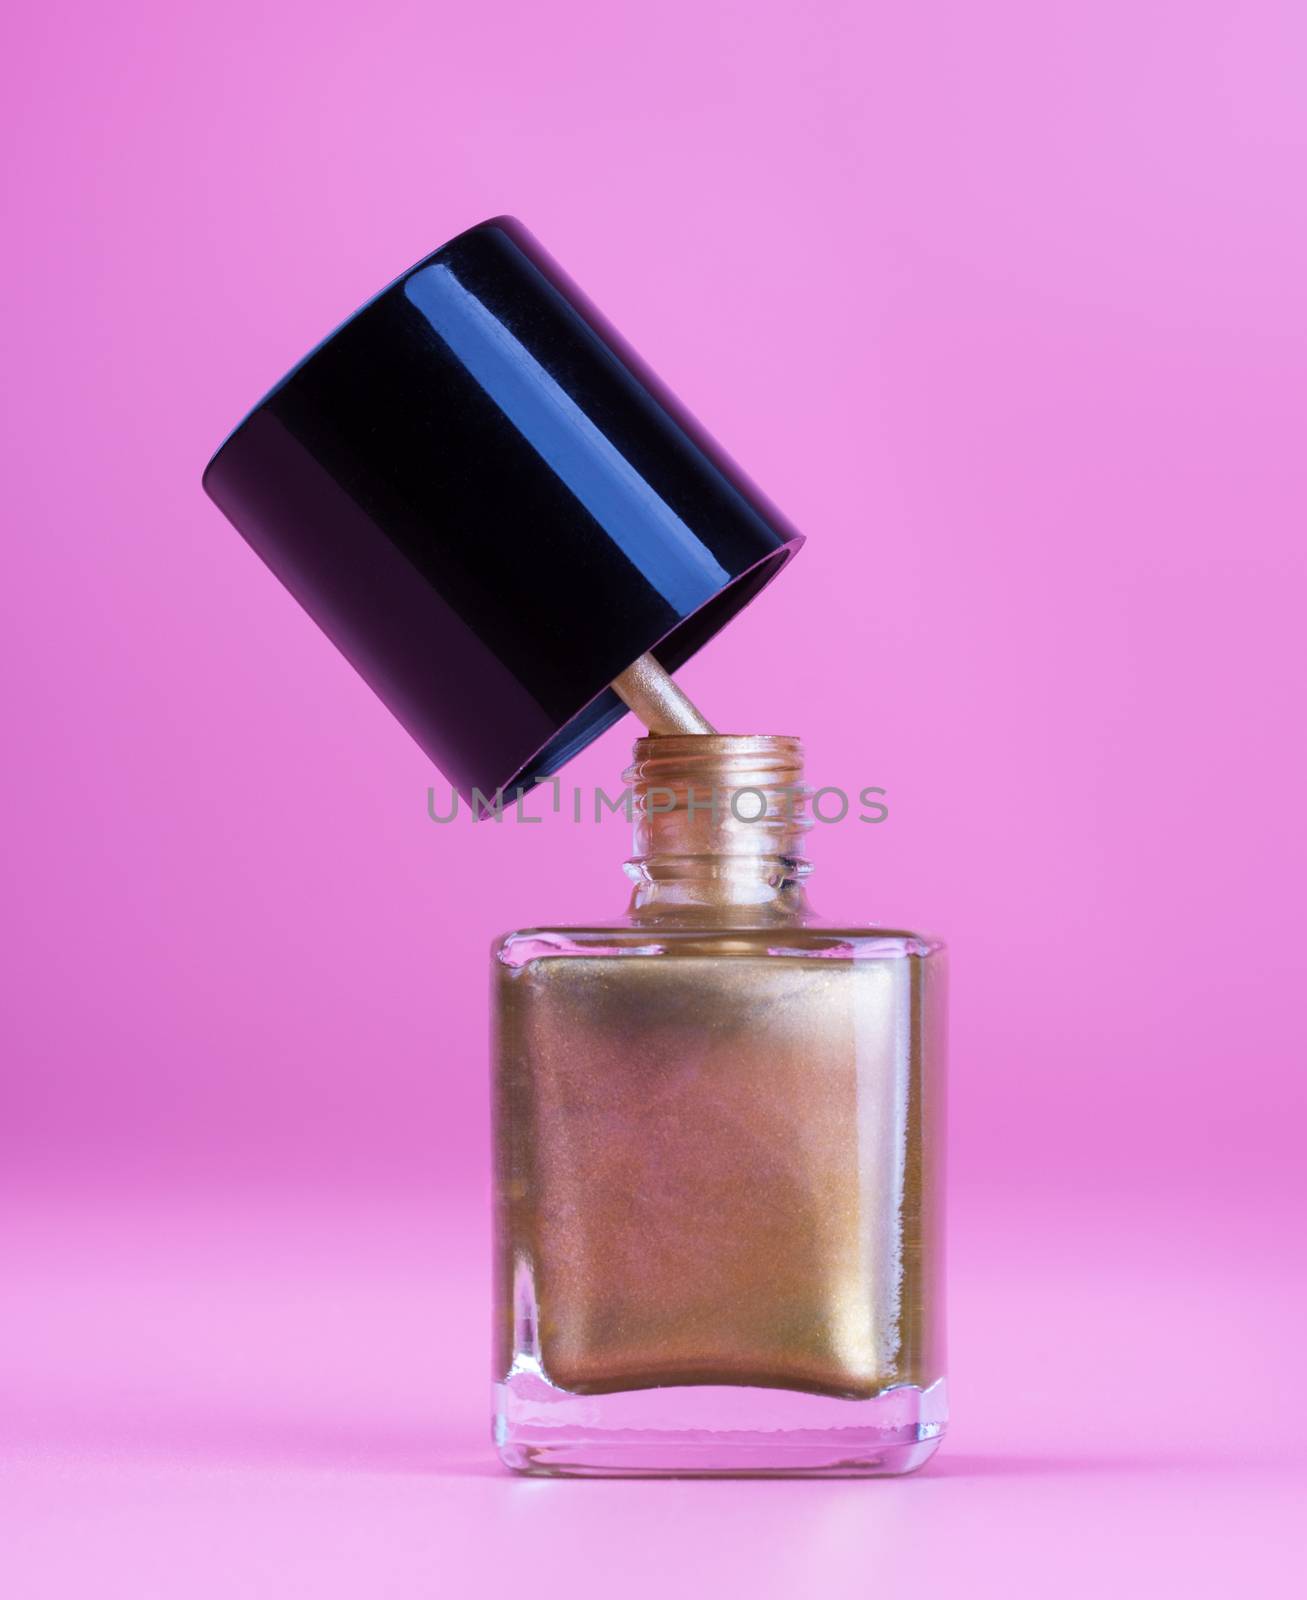 Bottle of gold nail polish by lanalanglois